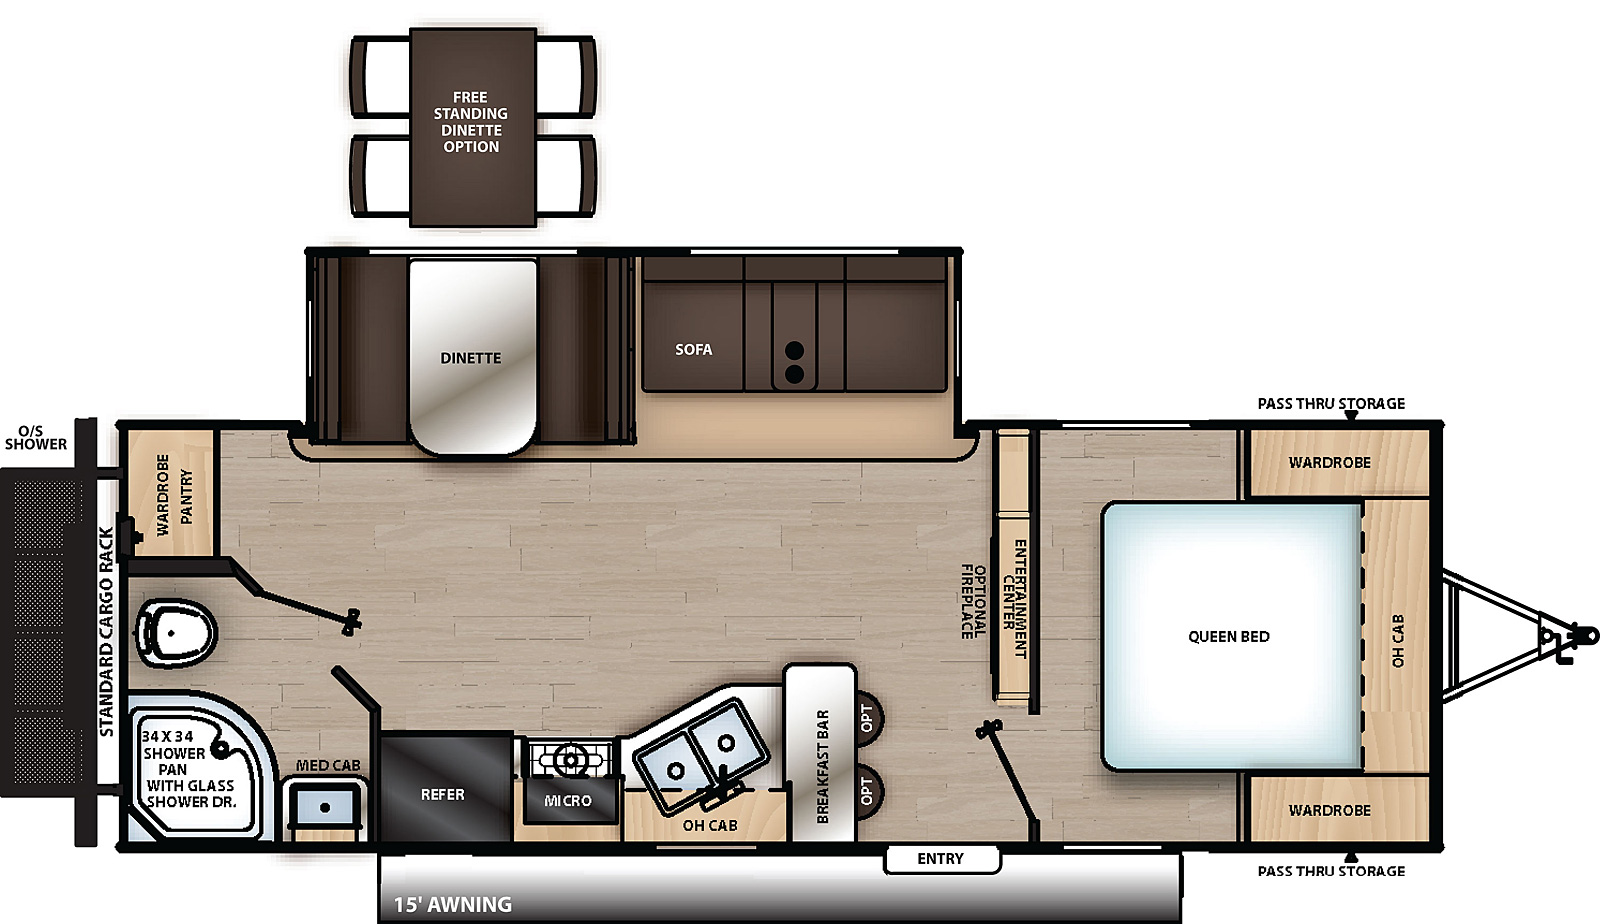 The 243RBS has one slide out on the off-door side and one entry door on the door side. Interior layout from front to back: front bedroom with foot facing queen bed, overhead cabinet, and wardrobes on either side of the bed; entertainment center; kitchen living dining area with off-door side slide out containing sofa and dinette; door side kitchen containing breakfast bar, double basin sink, overhead cabinet, cook top stove, microwave cabinet, and refrigerator; door side bathroom; and off-door side pantry.